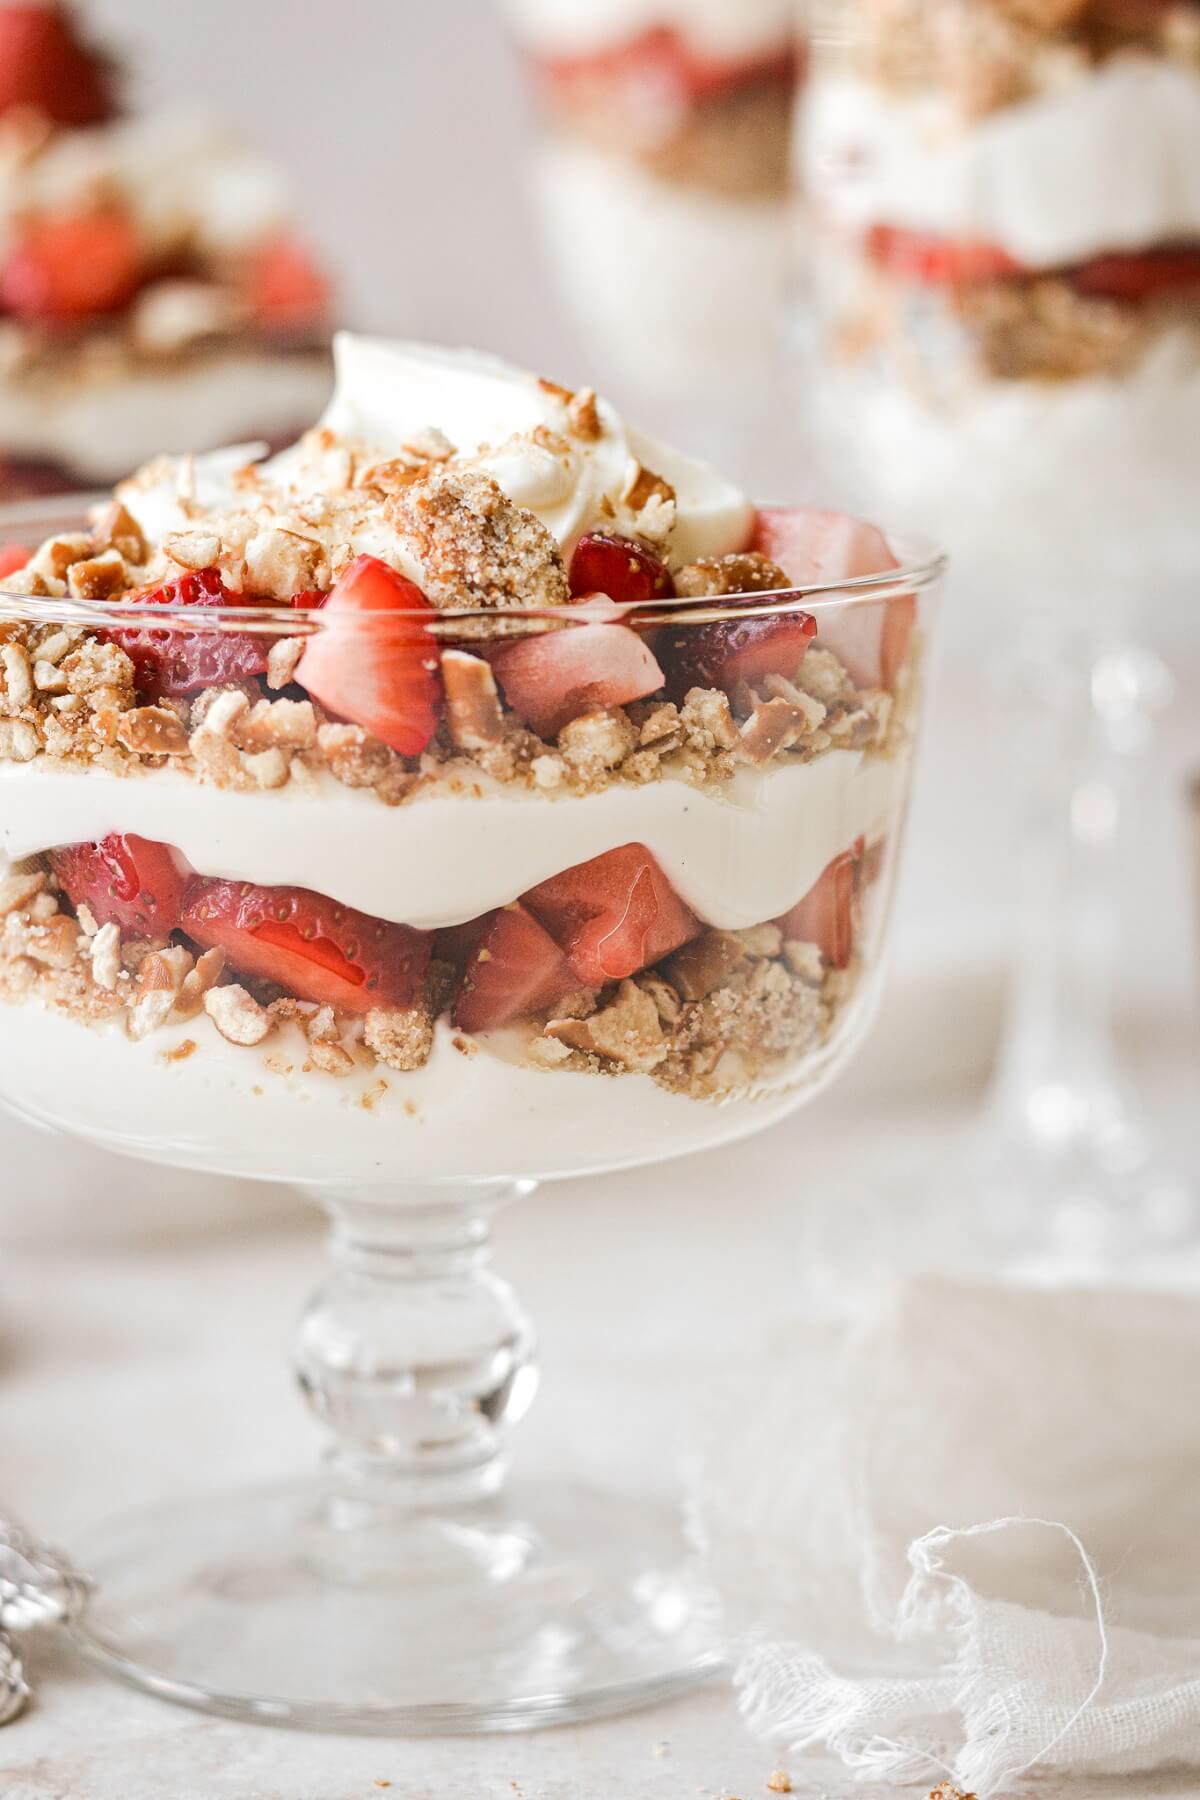 Layers of strawberries, whipped cream cheese and pretzels in a mini trifle dish.